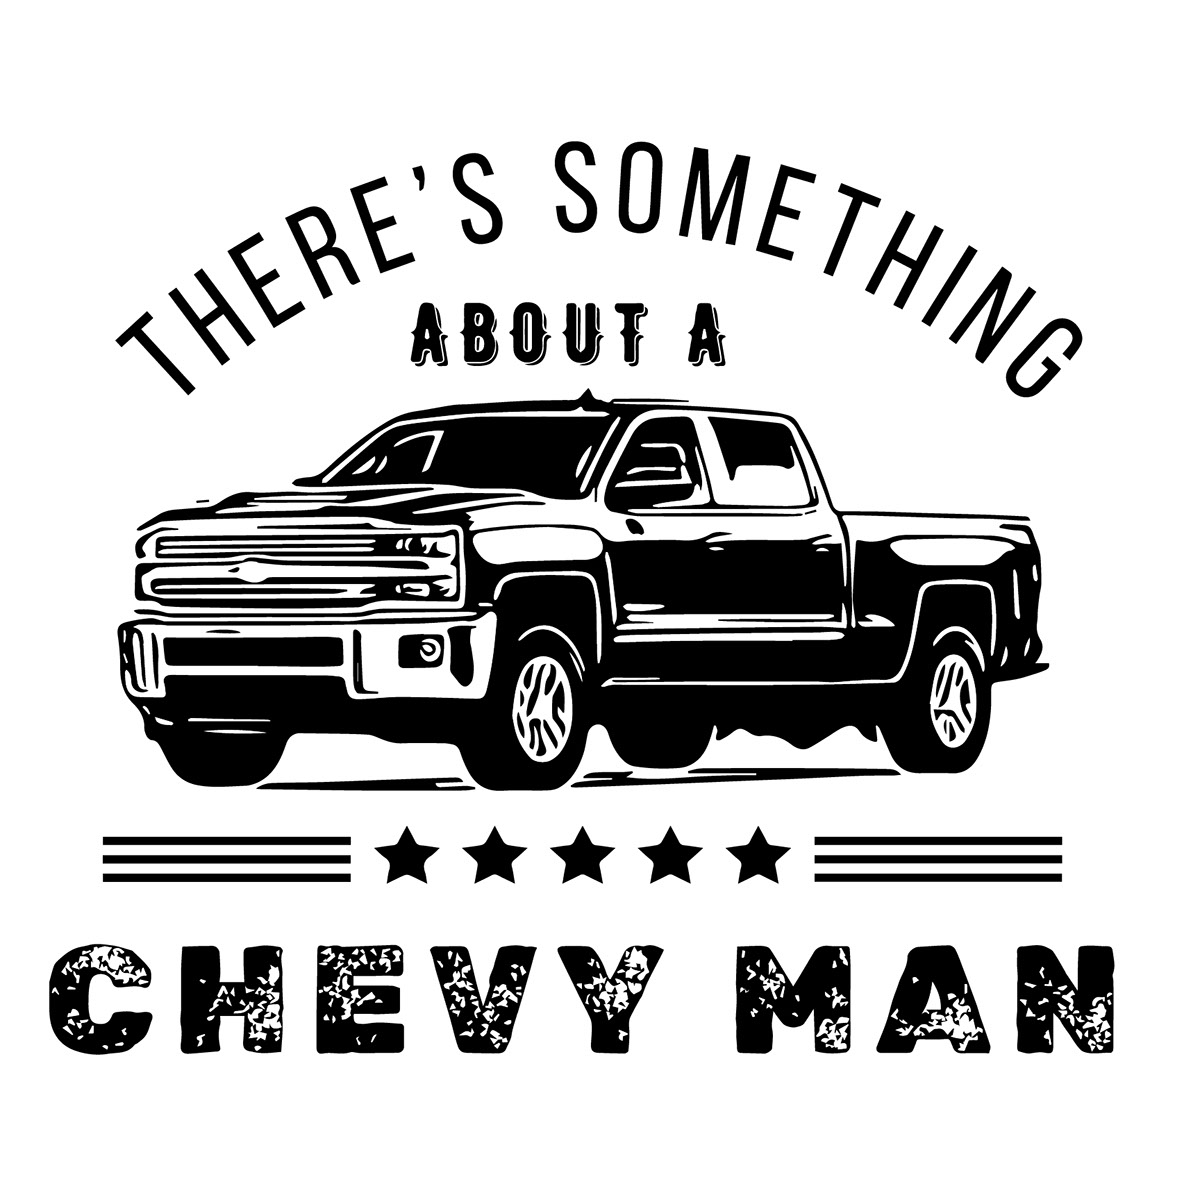 Chevy Man rendition image